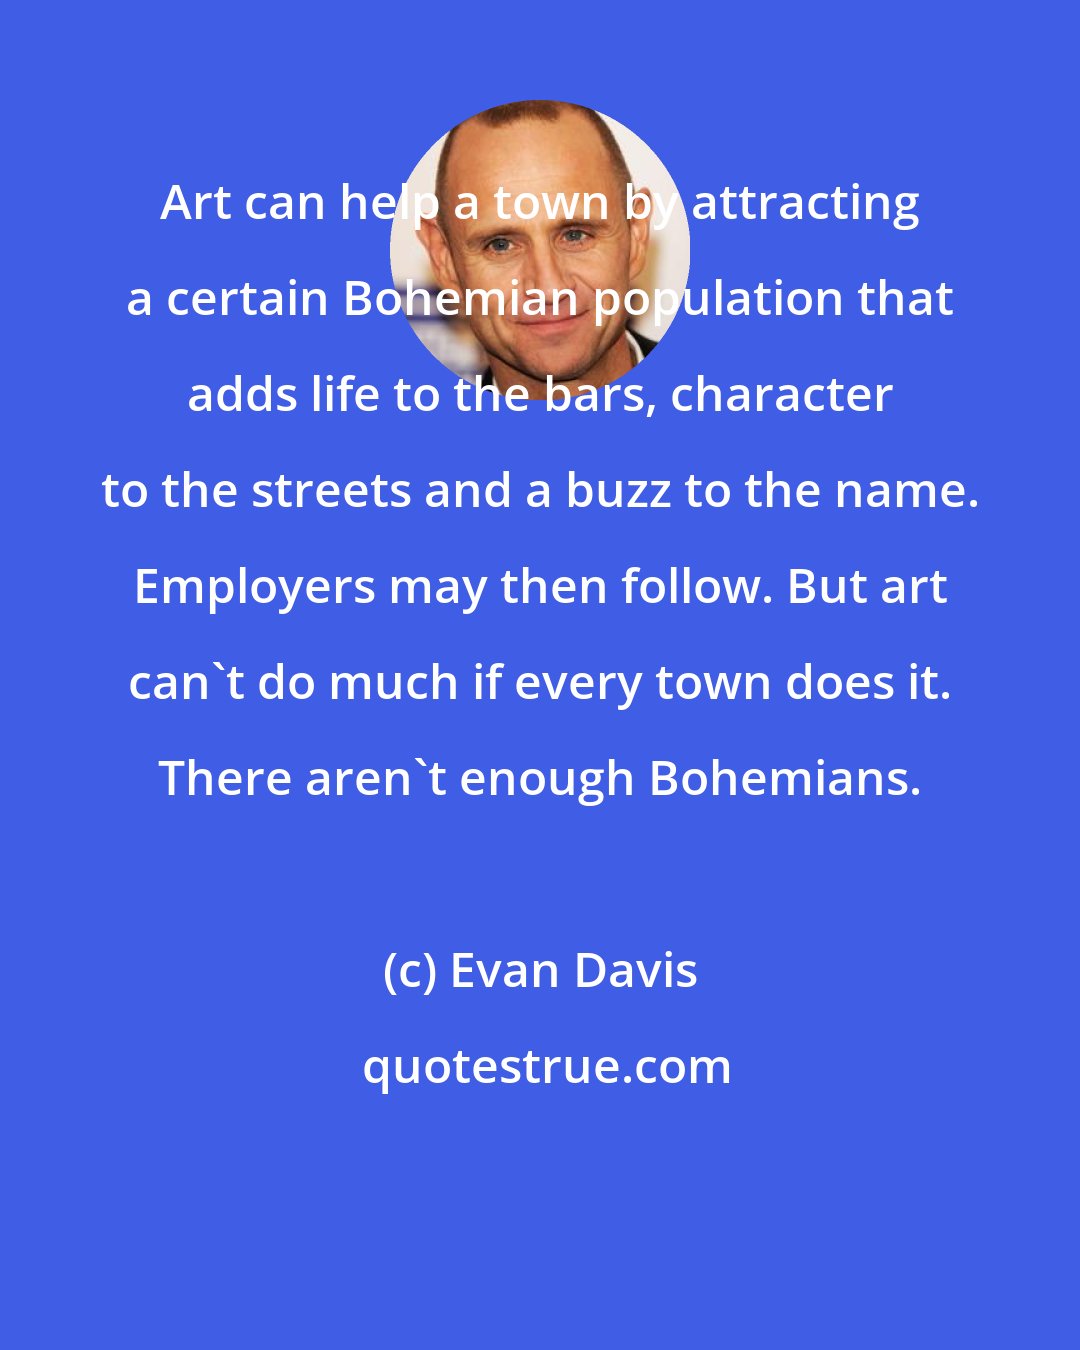 Evan Davis: Art can help a town by attracting a certain Bohemian population that adds life to the bars, character to the streets and a buzz to the name. Employers may then follow. But art can't do much if every town does it. There aren't enough Bohemians.